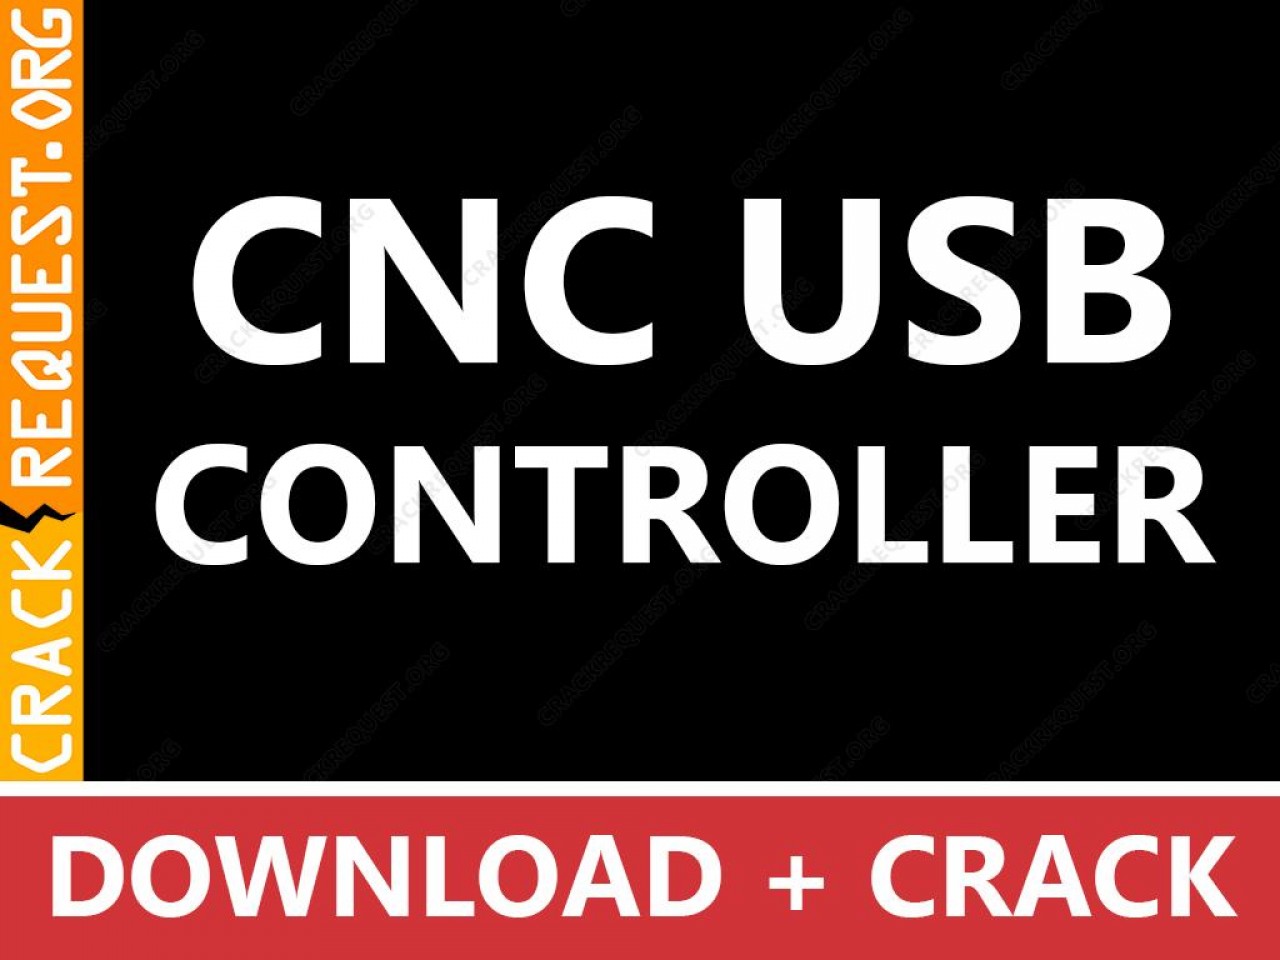 cnc usb controller software in english